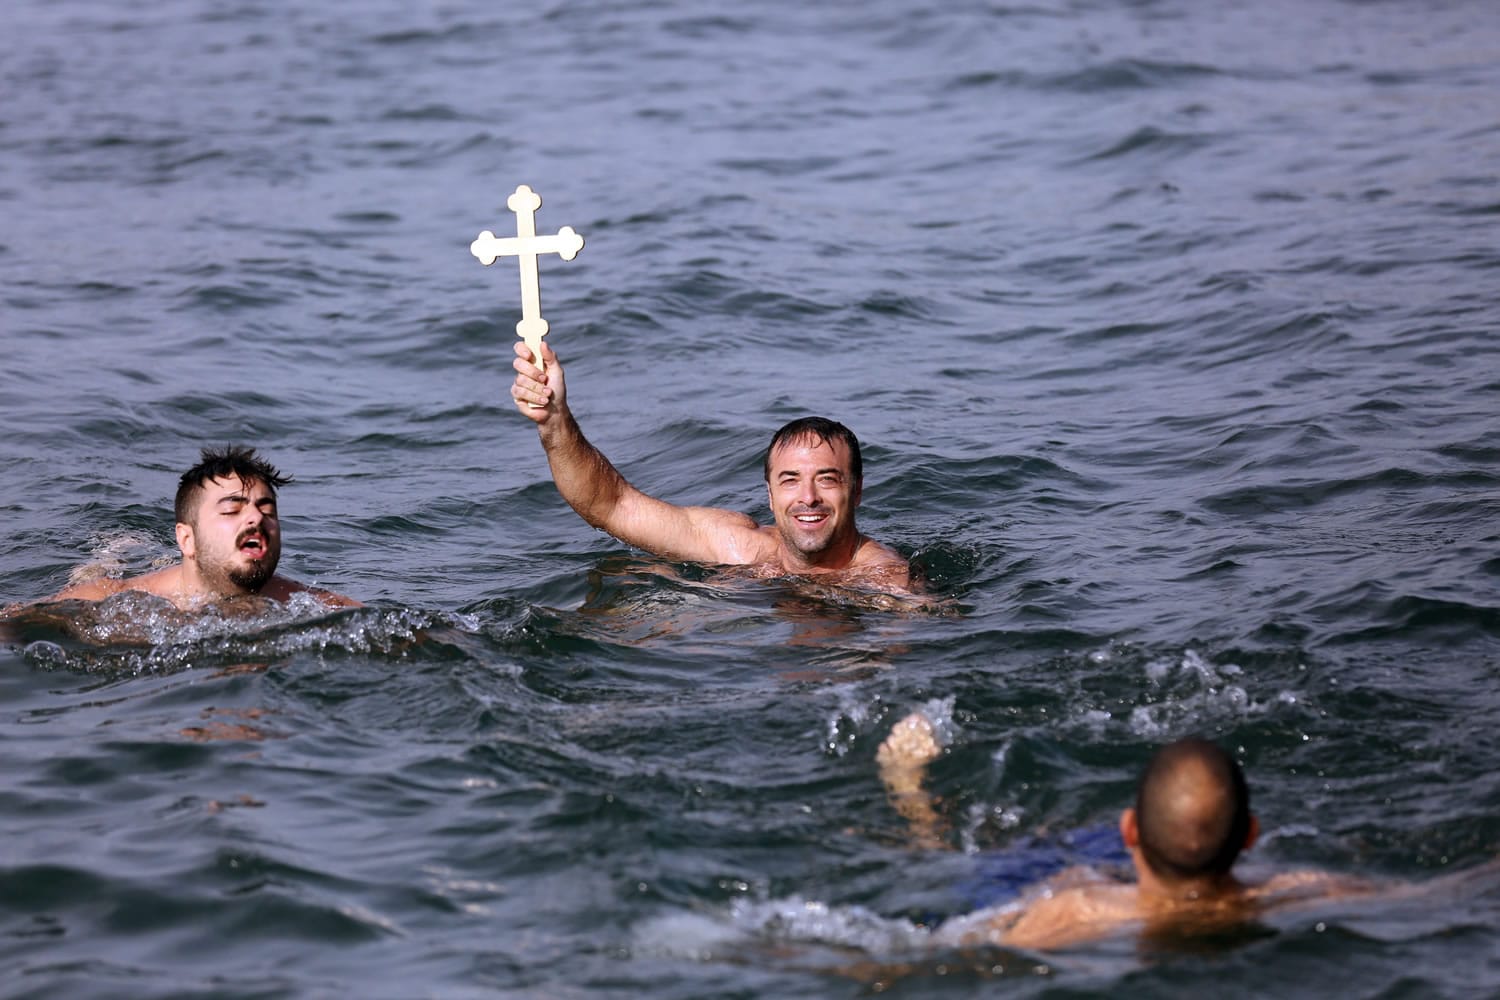 Lefteris Chrisomallos from Greece holds up a wooden cross after he retrieved it during an Epiphany ceremony Wednesday in Izmir, Turkey.